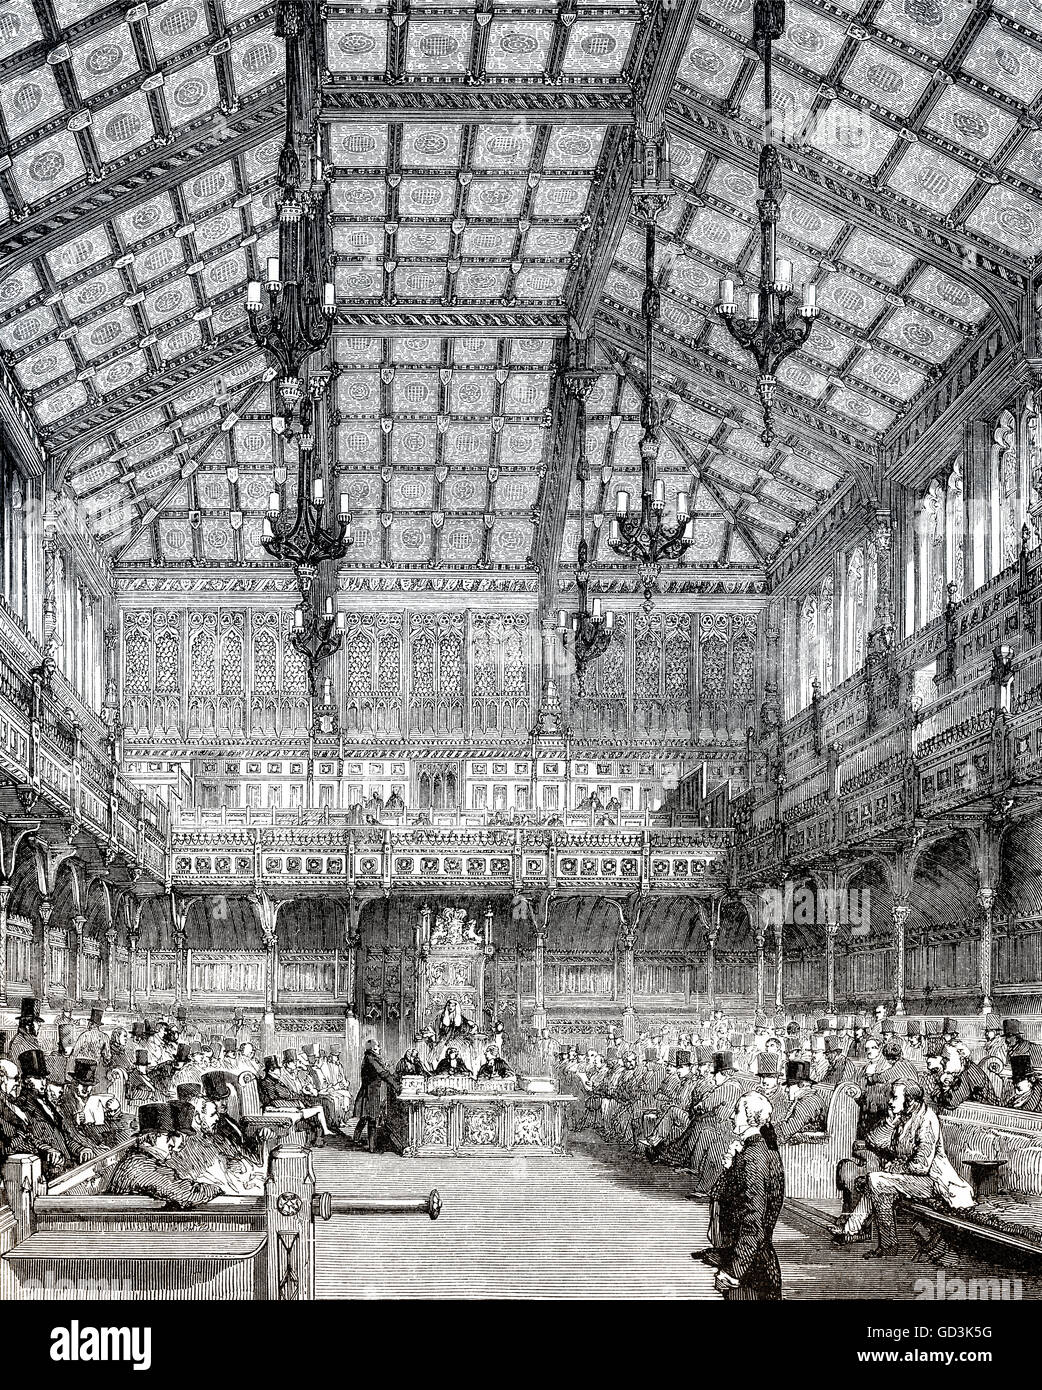 The House of Commons, London, England, 19th century Stock Photo